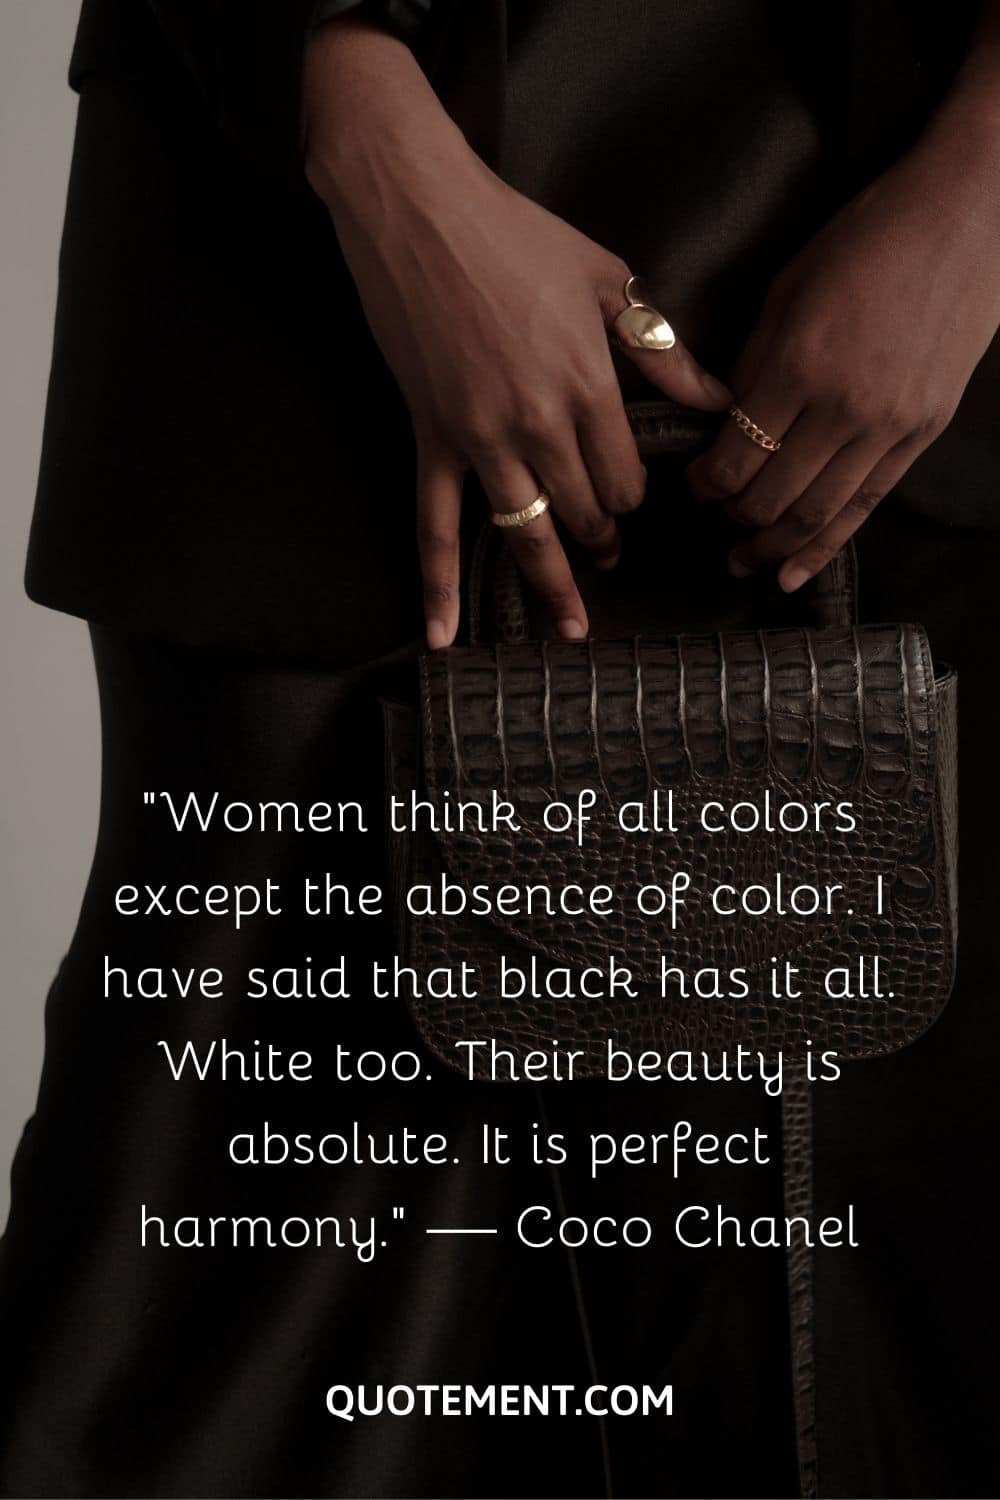 Women think of all colors except the absence of color.